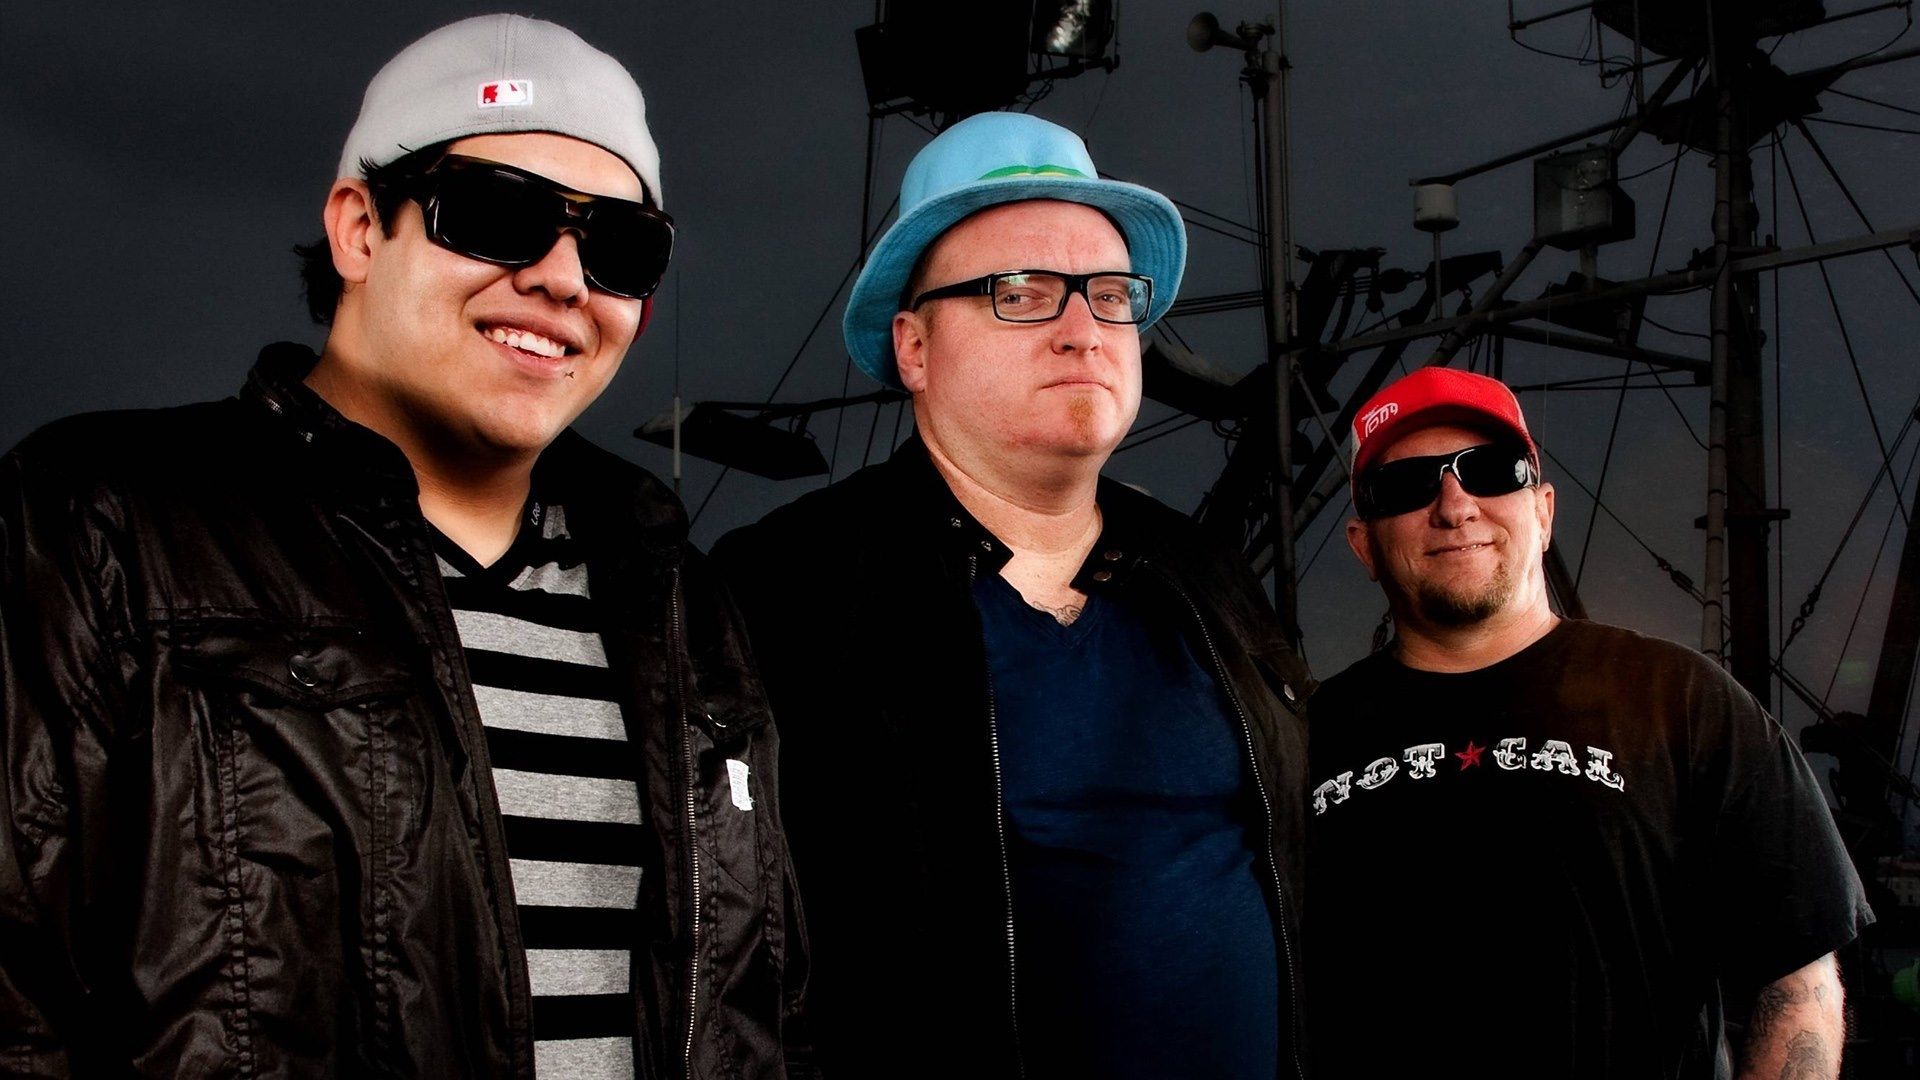 Download Wallpaper 1920x1080 Sublime with rome, Glasses, T shirt